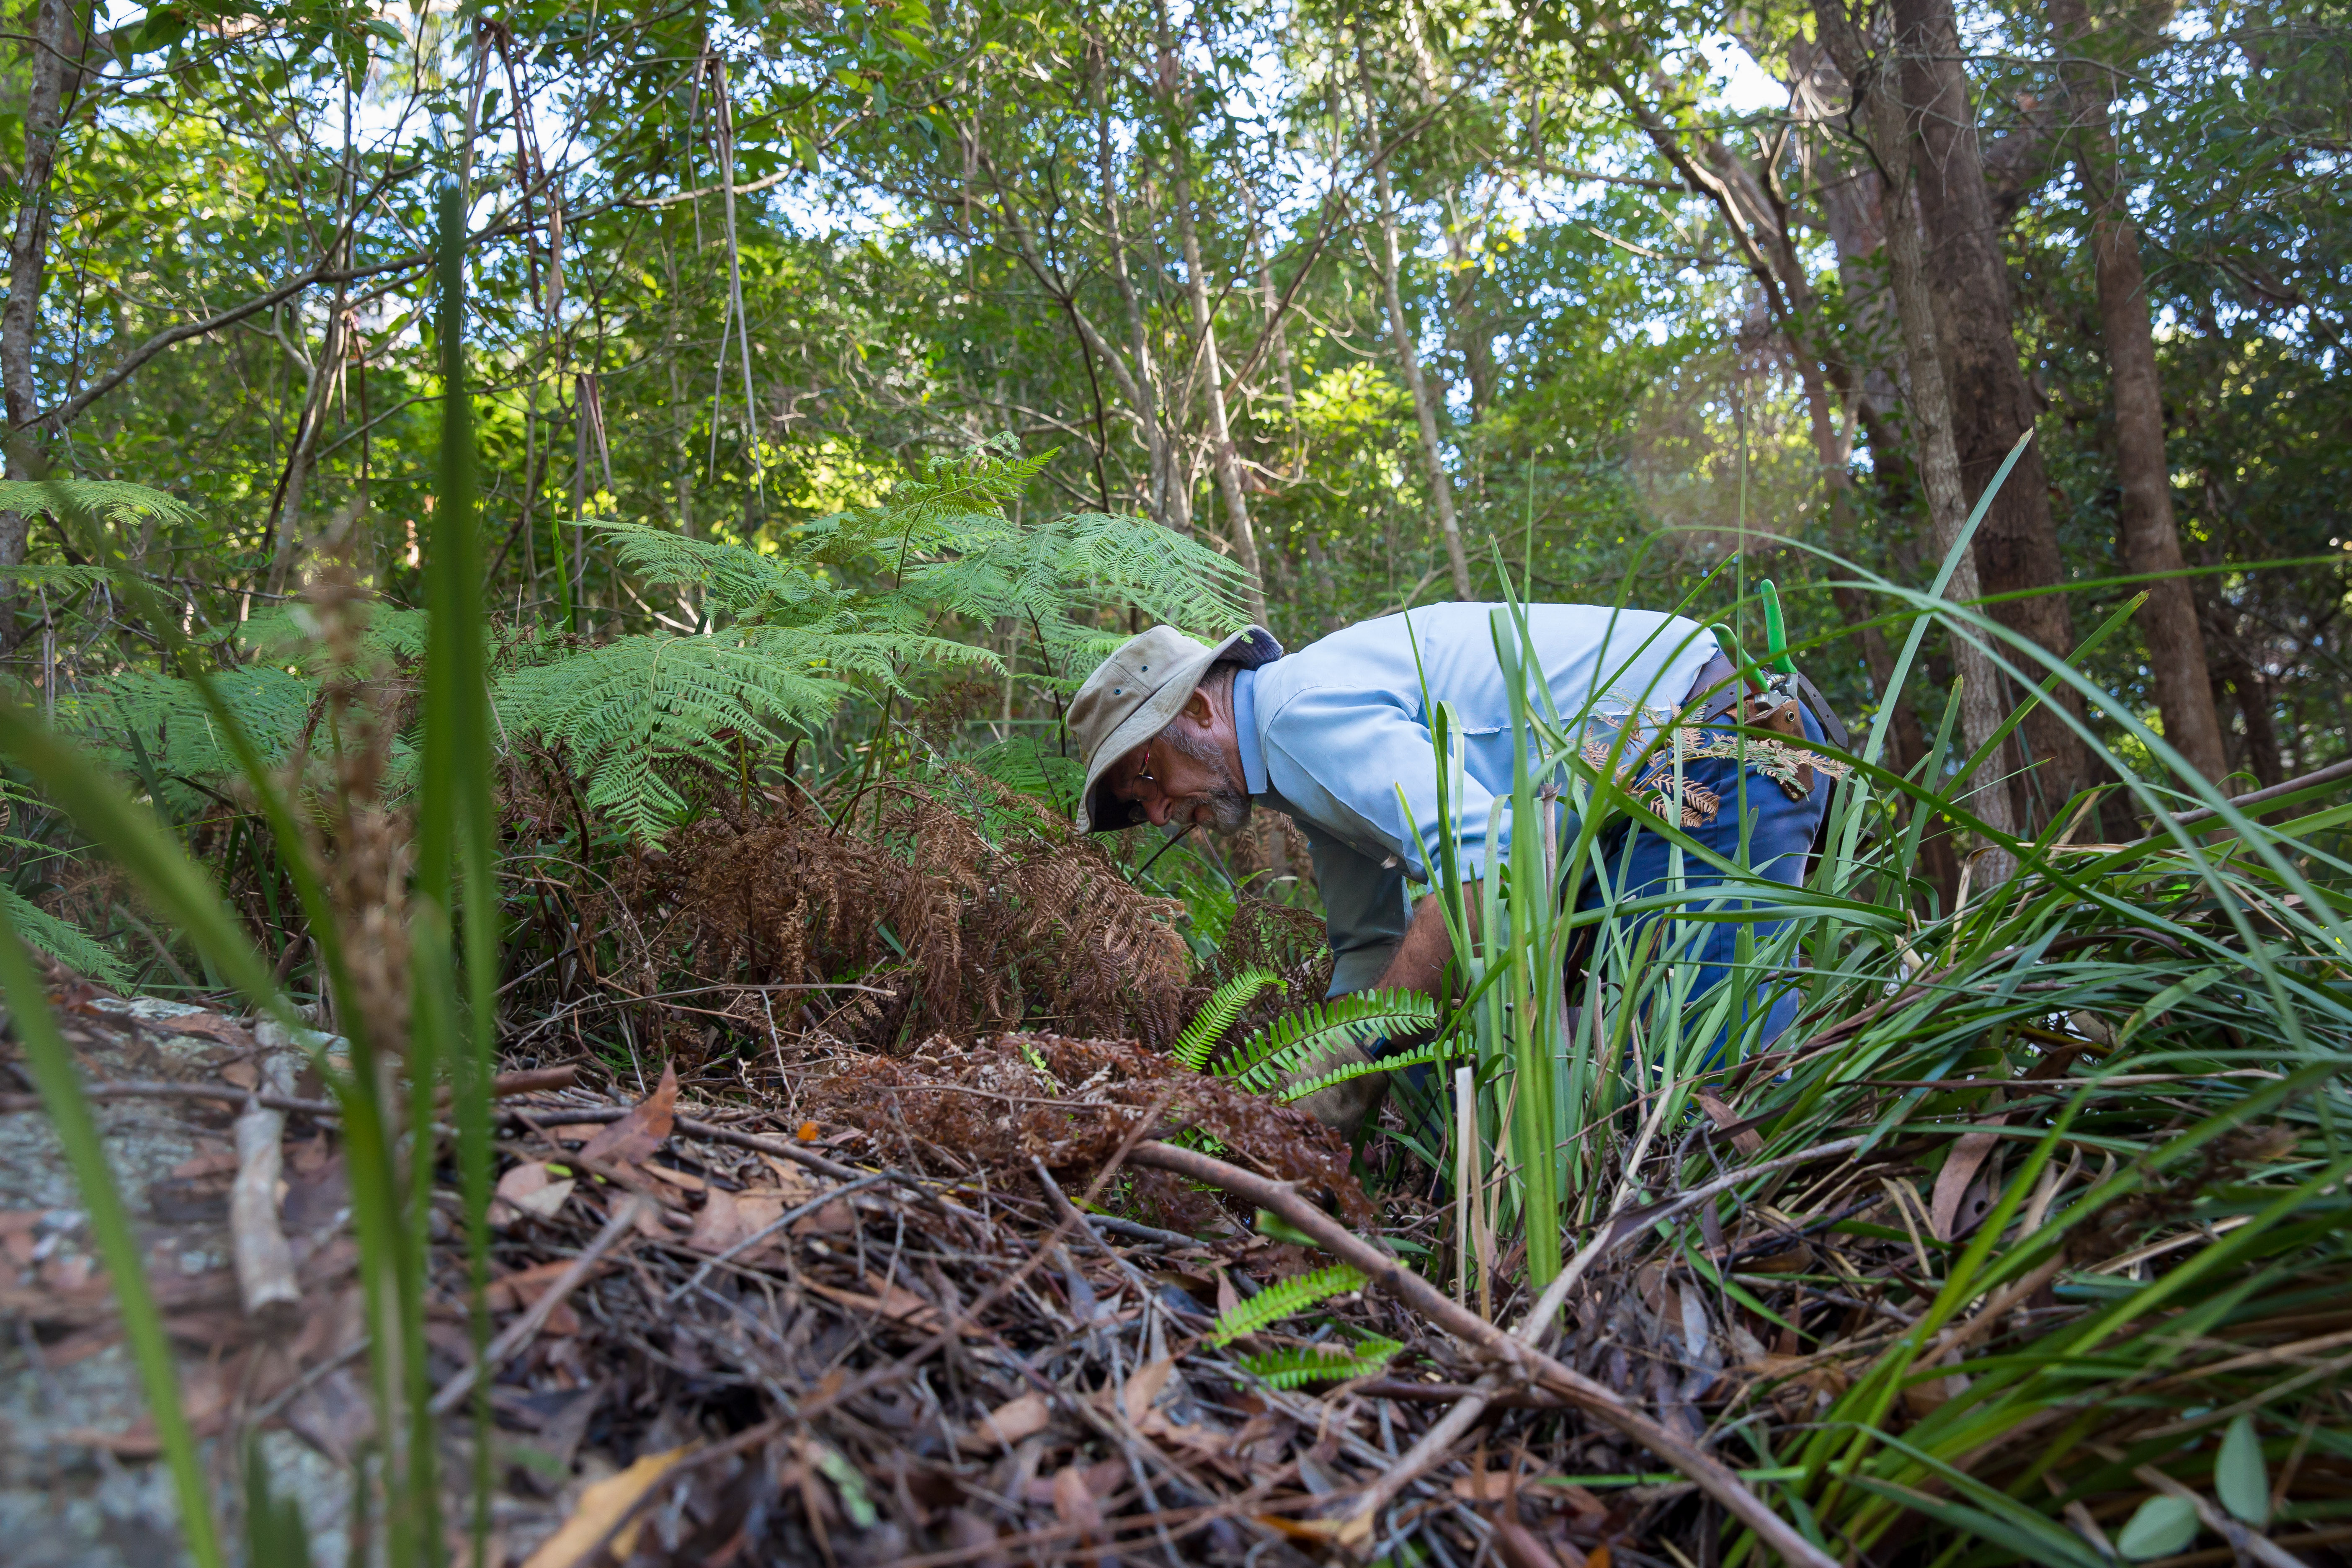 Banksia Reserve Bushcare Group have been working for many years removing environmental weeds from the bushland areas of the reserve. This planting event will greatly assist the Bushcare Volunteers in their efforts to regenerate native bushland areas